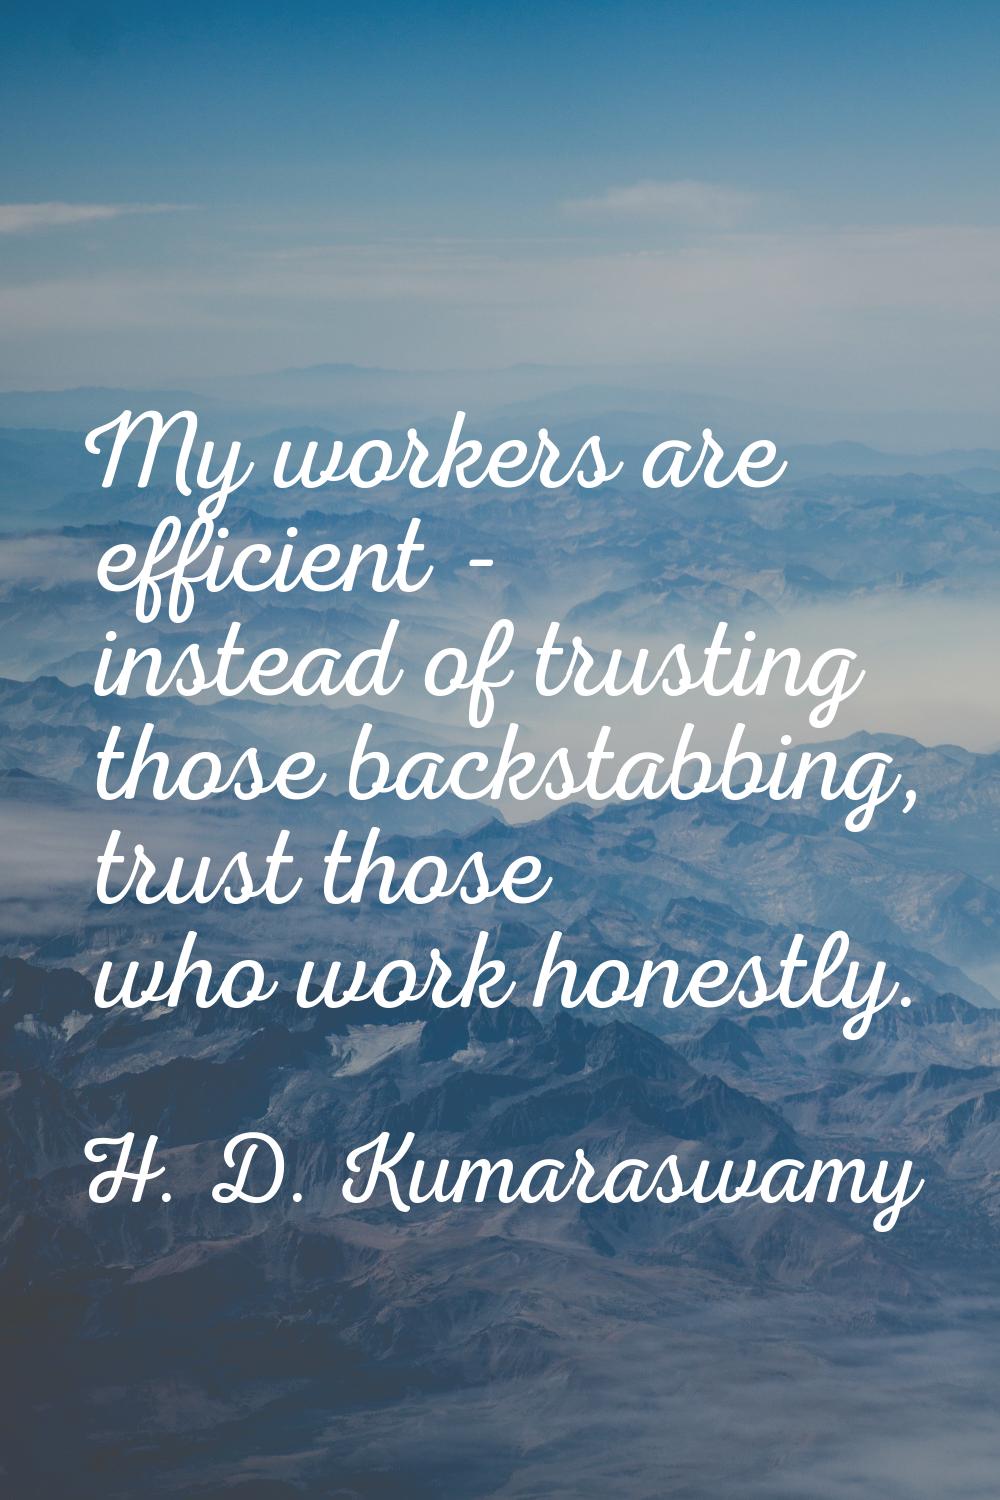 My workers are efficient - instead of trusting those backstabbing, trust those who work honestly.